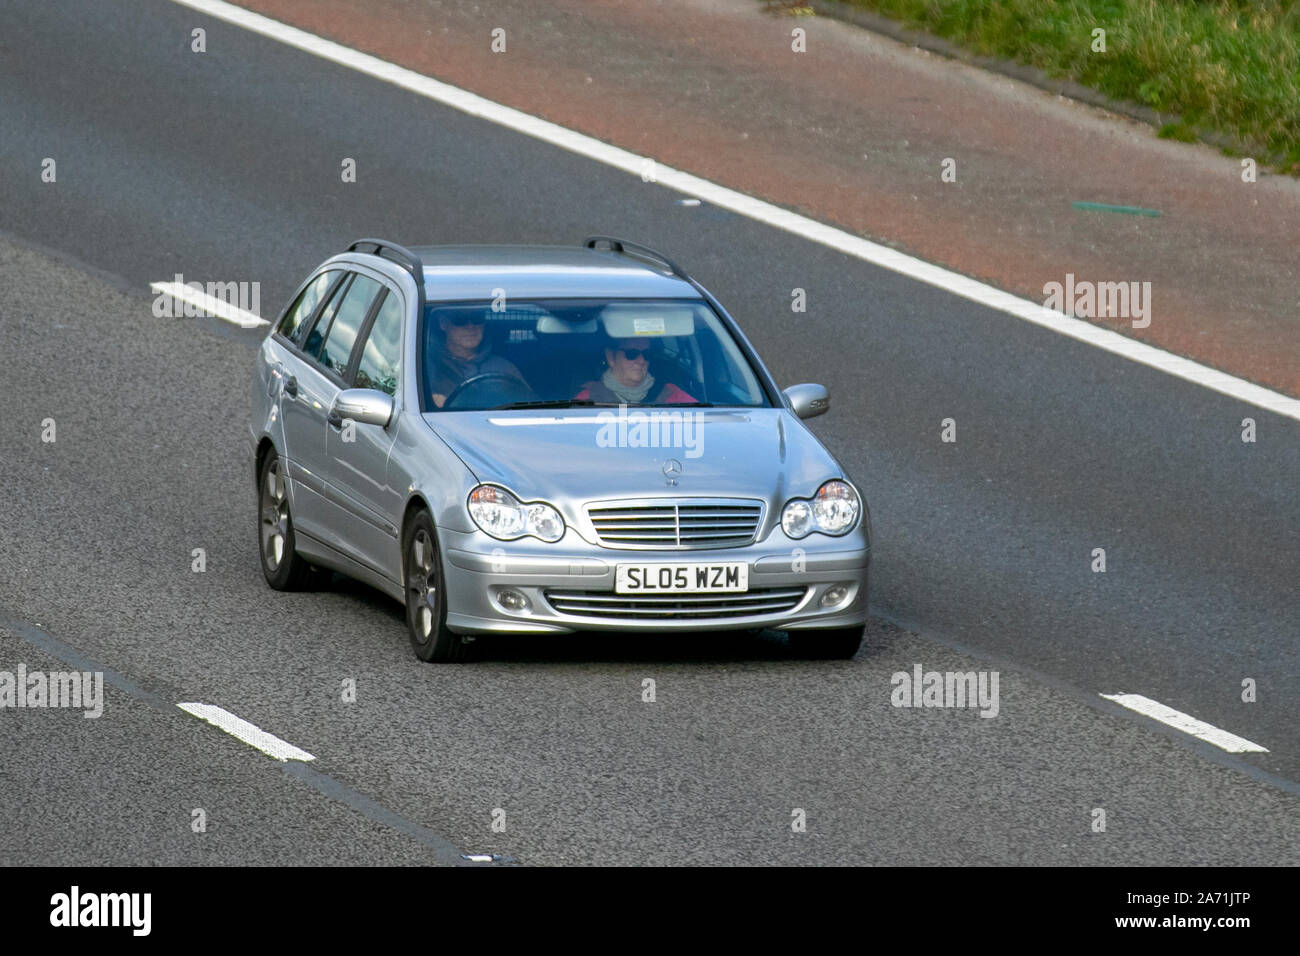 Mercedes C200 High Resolution Stock Photography and Images - Alamy